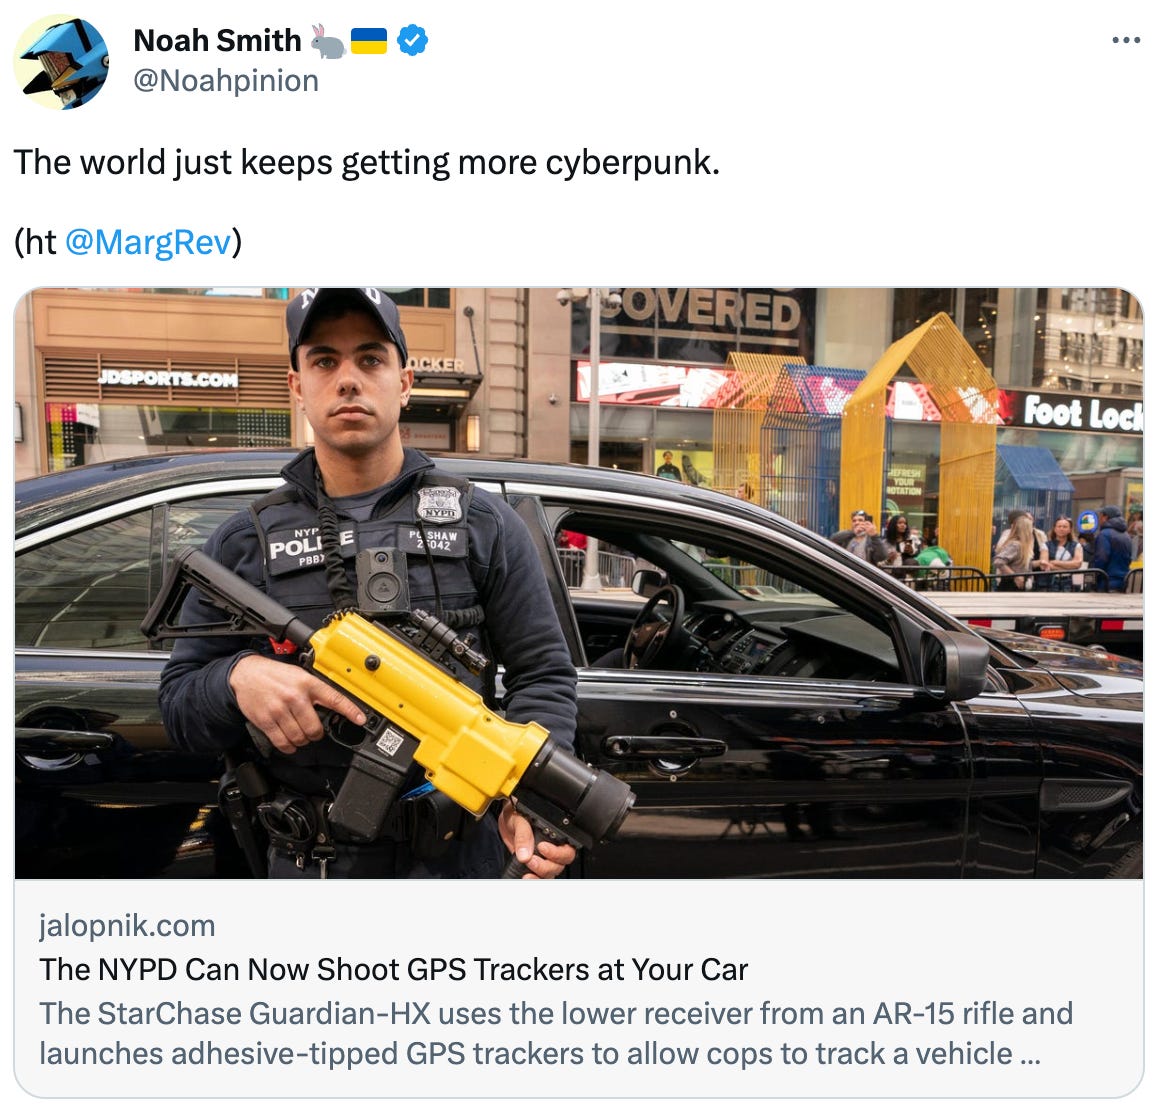  Noah Smith 🐇🇺🇦 @Noahpinion The world just keeps getting more cyberpunk.  (ht  @MargRev ) jalopnik.com The NYPD Can Now Shoot GPS Trackers at Your Car The StarChase Guardian-HX uses the lower receiver from an AR-15 rifle and launches adhesive-tipped GPS trackers to allow cops to track a vehicle remotely. 